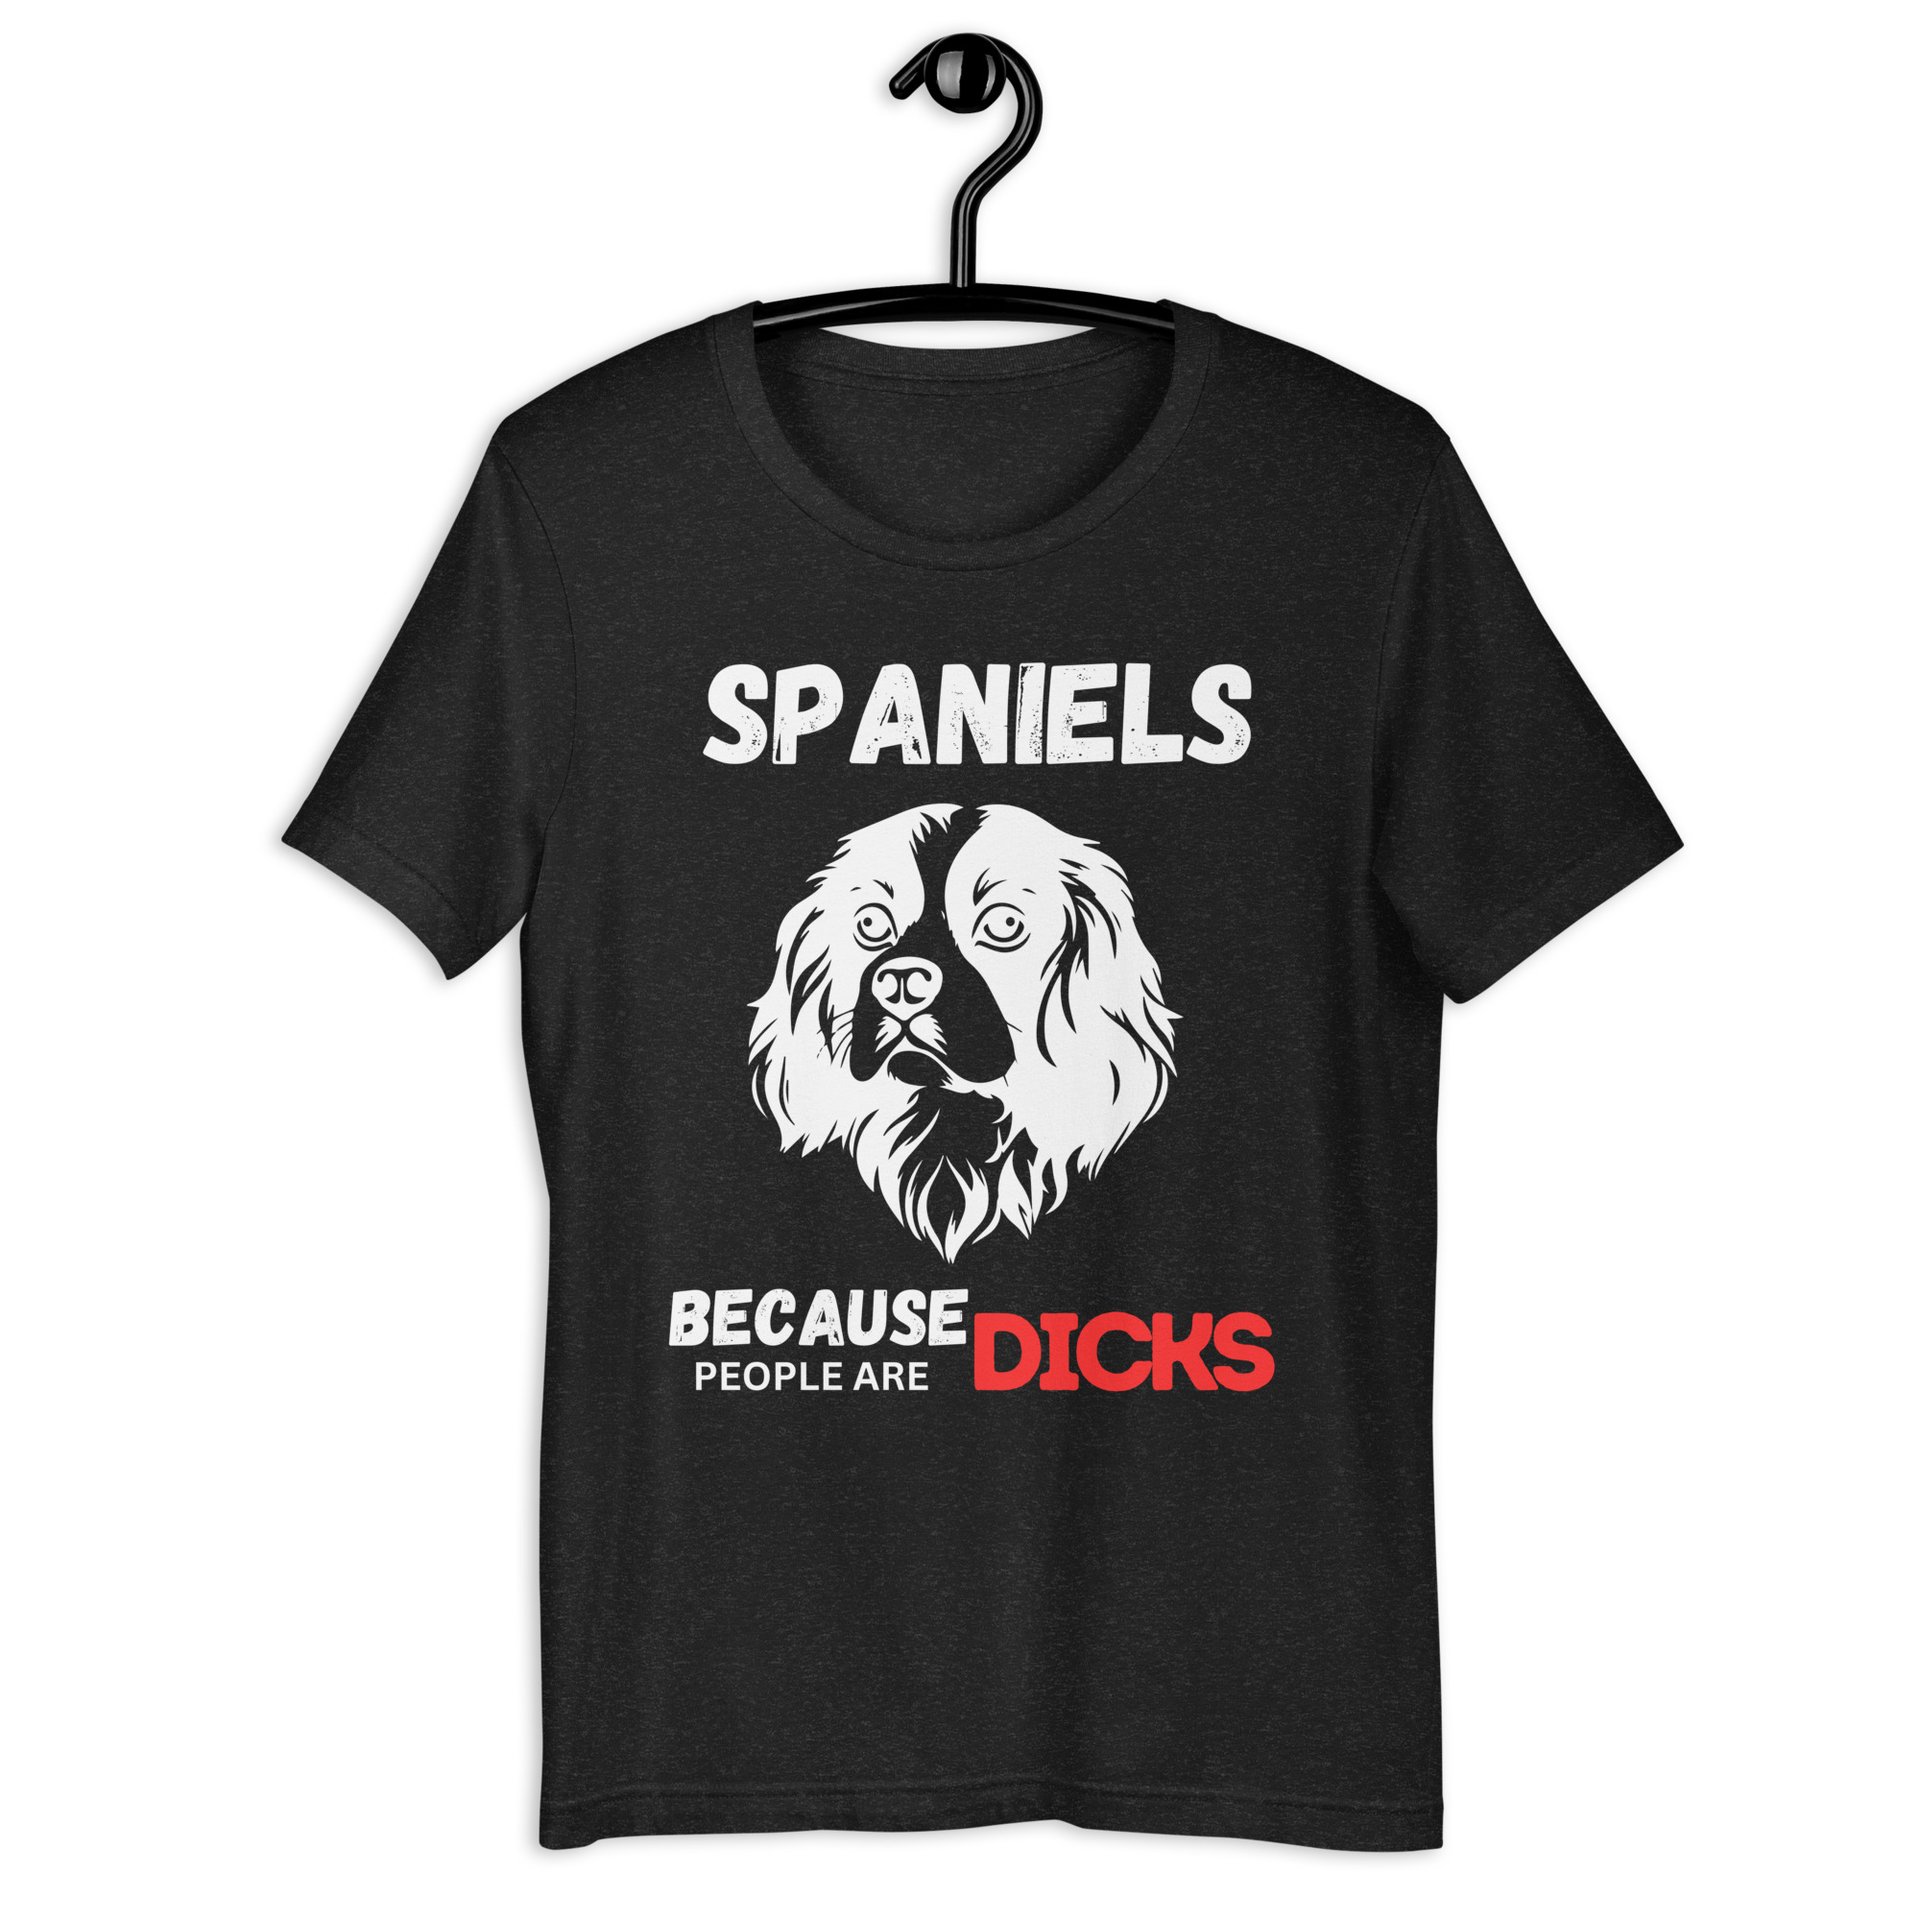 Spaniels Because People Are Dicks Unisex T-Shirt Standard